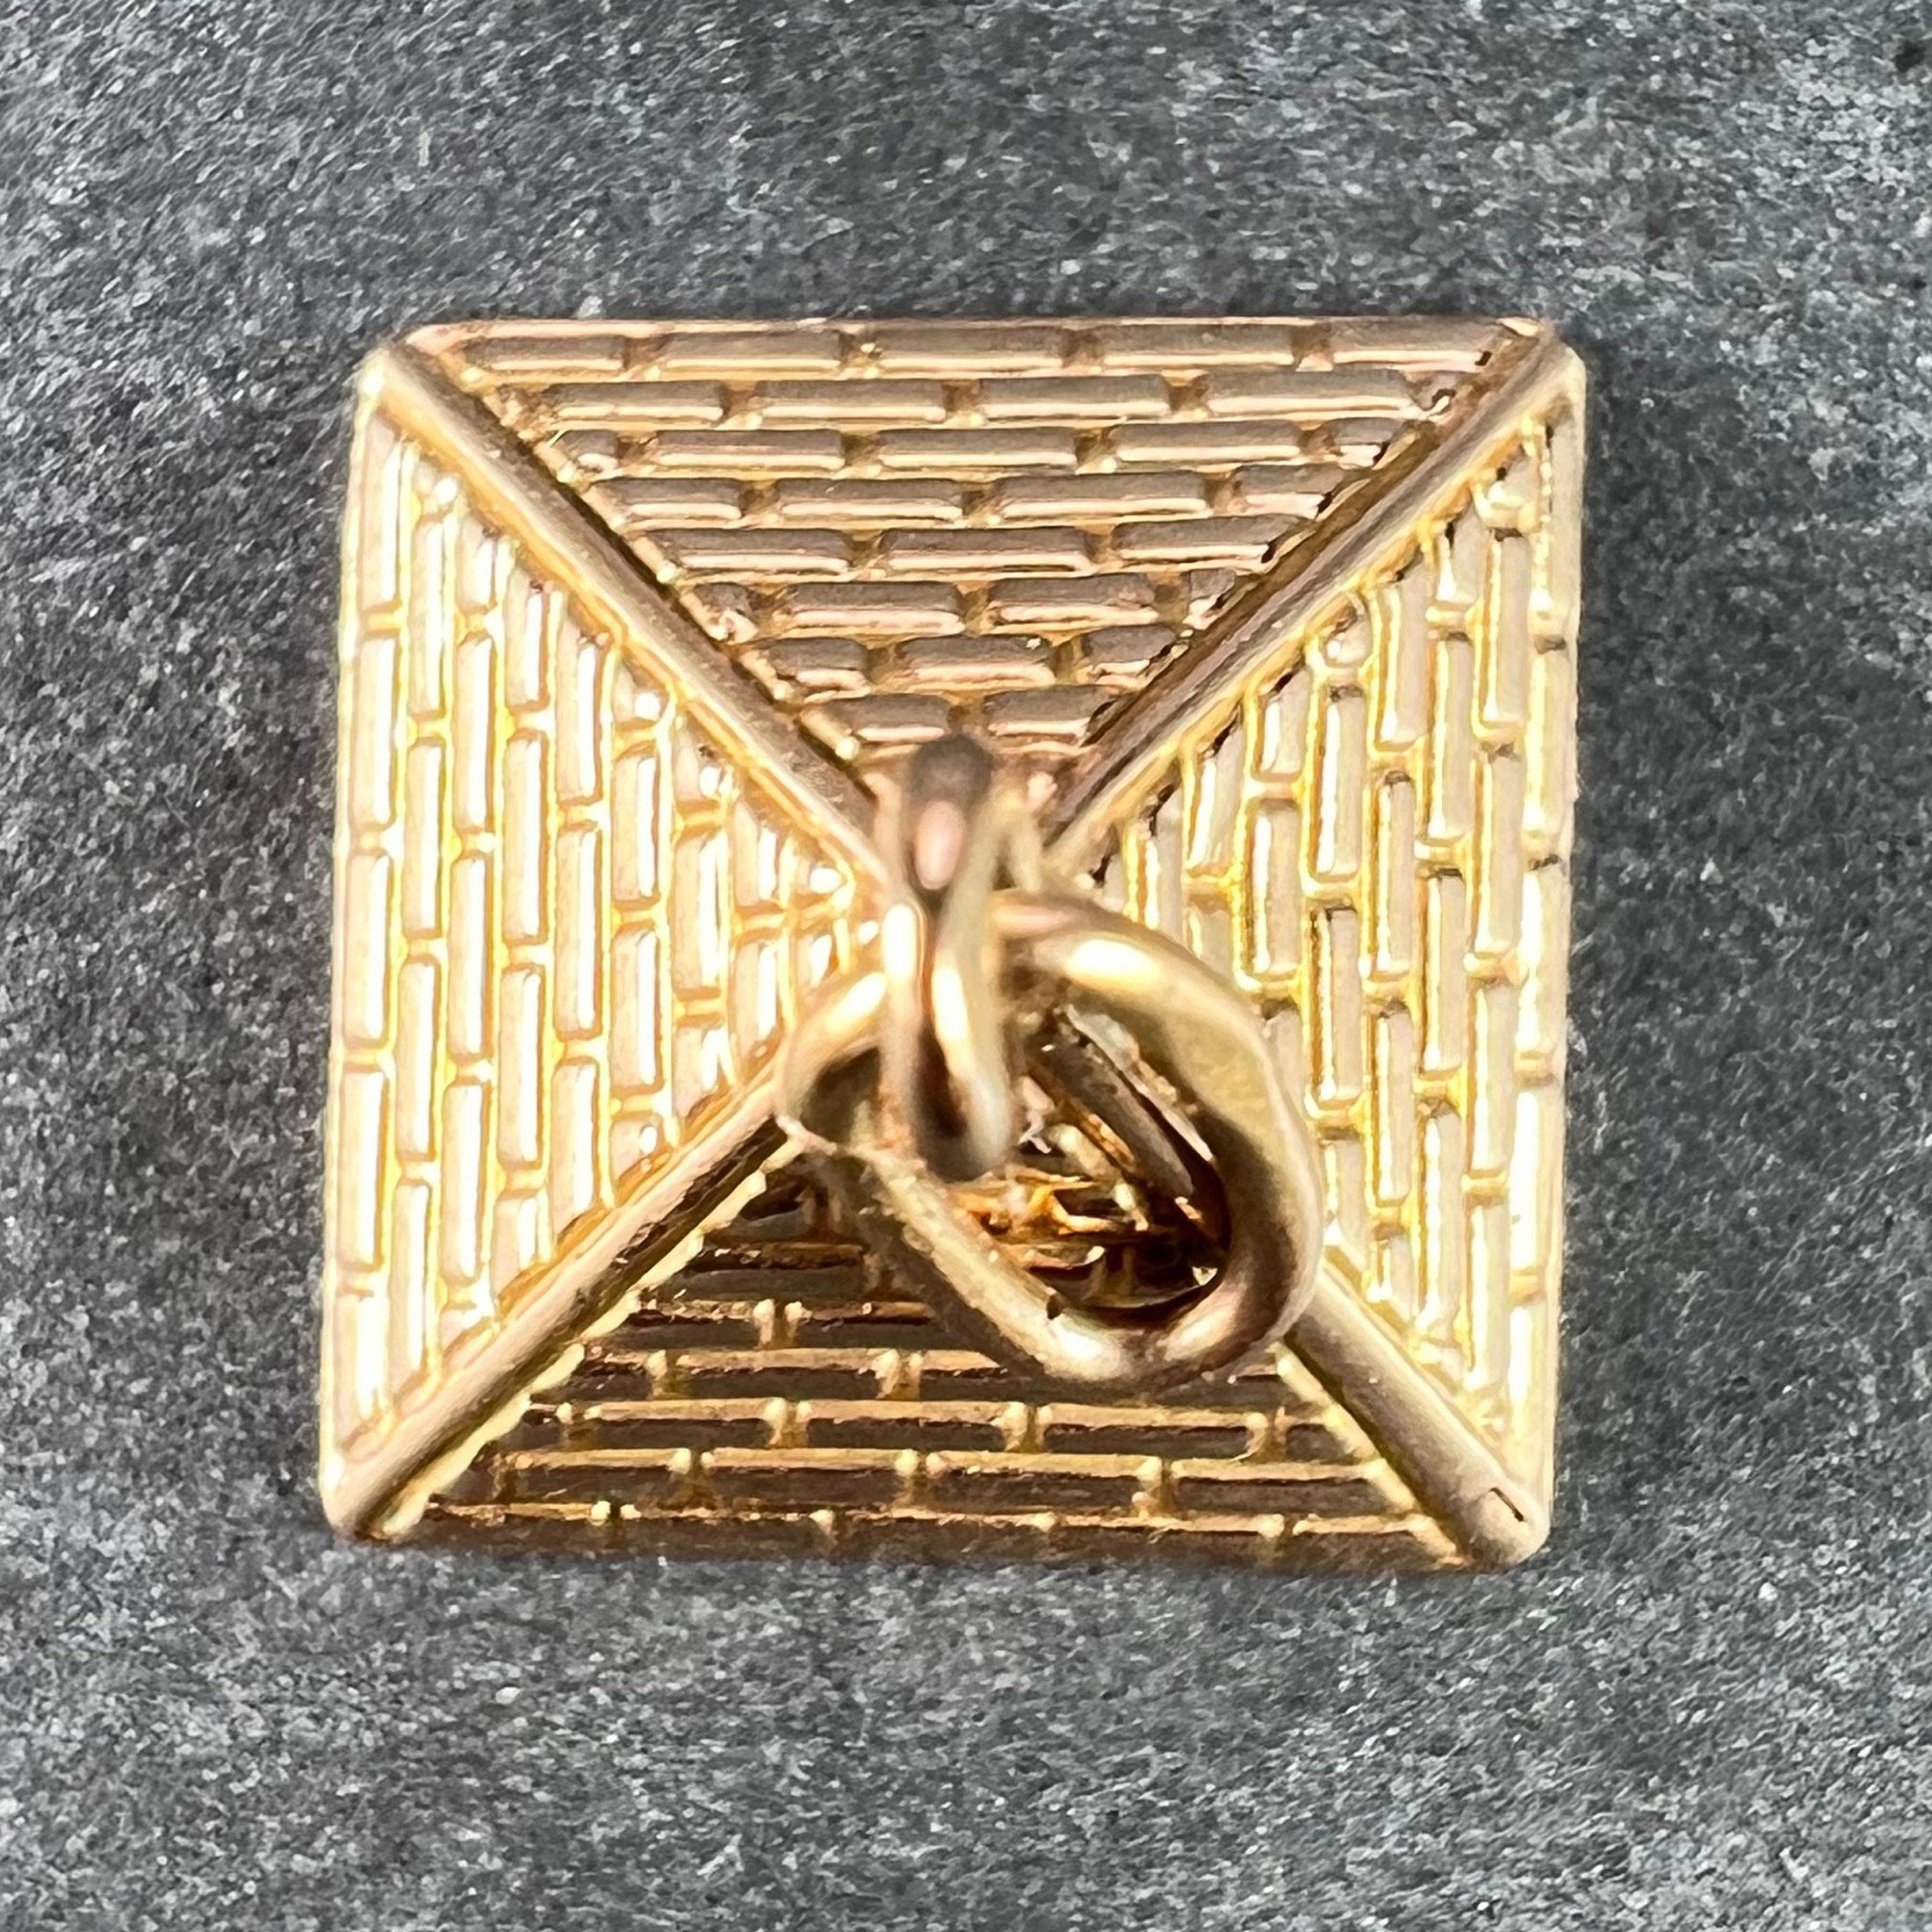  An 18 karat (18K) rose gold charm pendant designed as an Egyptian pyramid. Stamped with the Egyptian marks for 18 karat gold.
 
Dimensions: 1 x 1.2 x 1.2 cm (not including jump ring)
Weight: 1.11 grams 
(Chain not included)